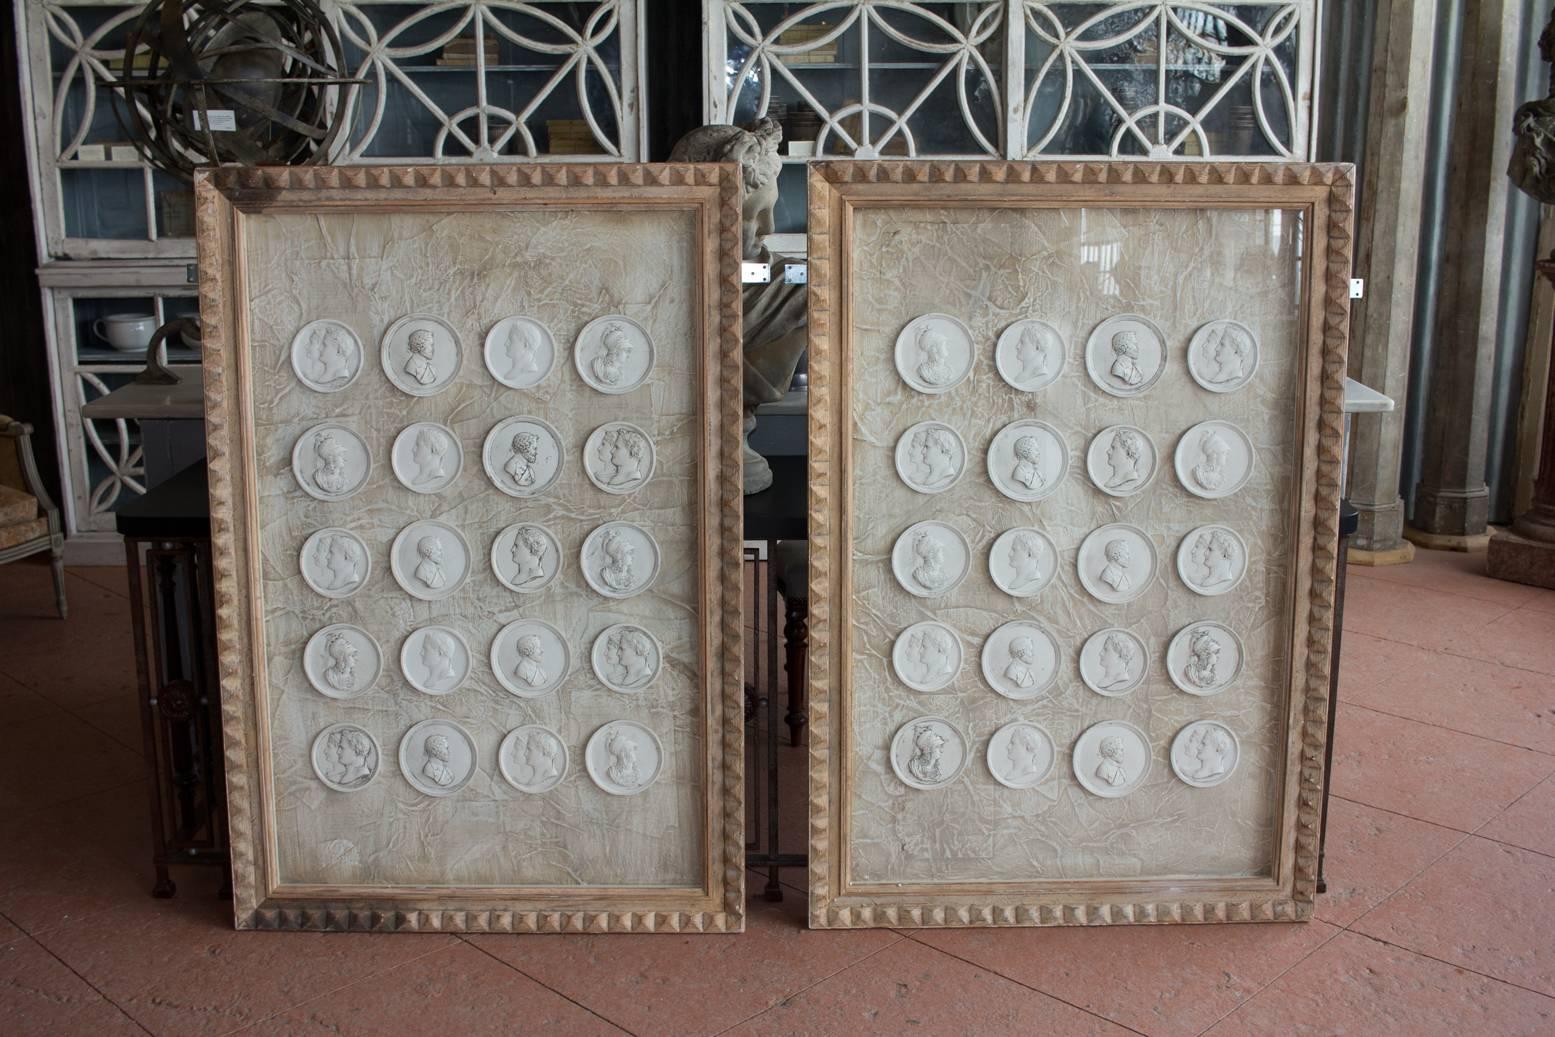 Twenty framed recast Grand Tour intaglios. The frame is made from antique Italian architrave and backed with original parchment that shows signs of early writing.

Two available.